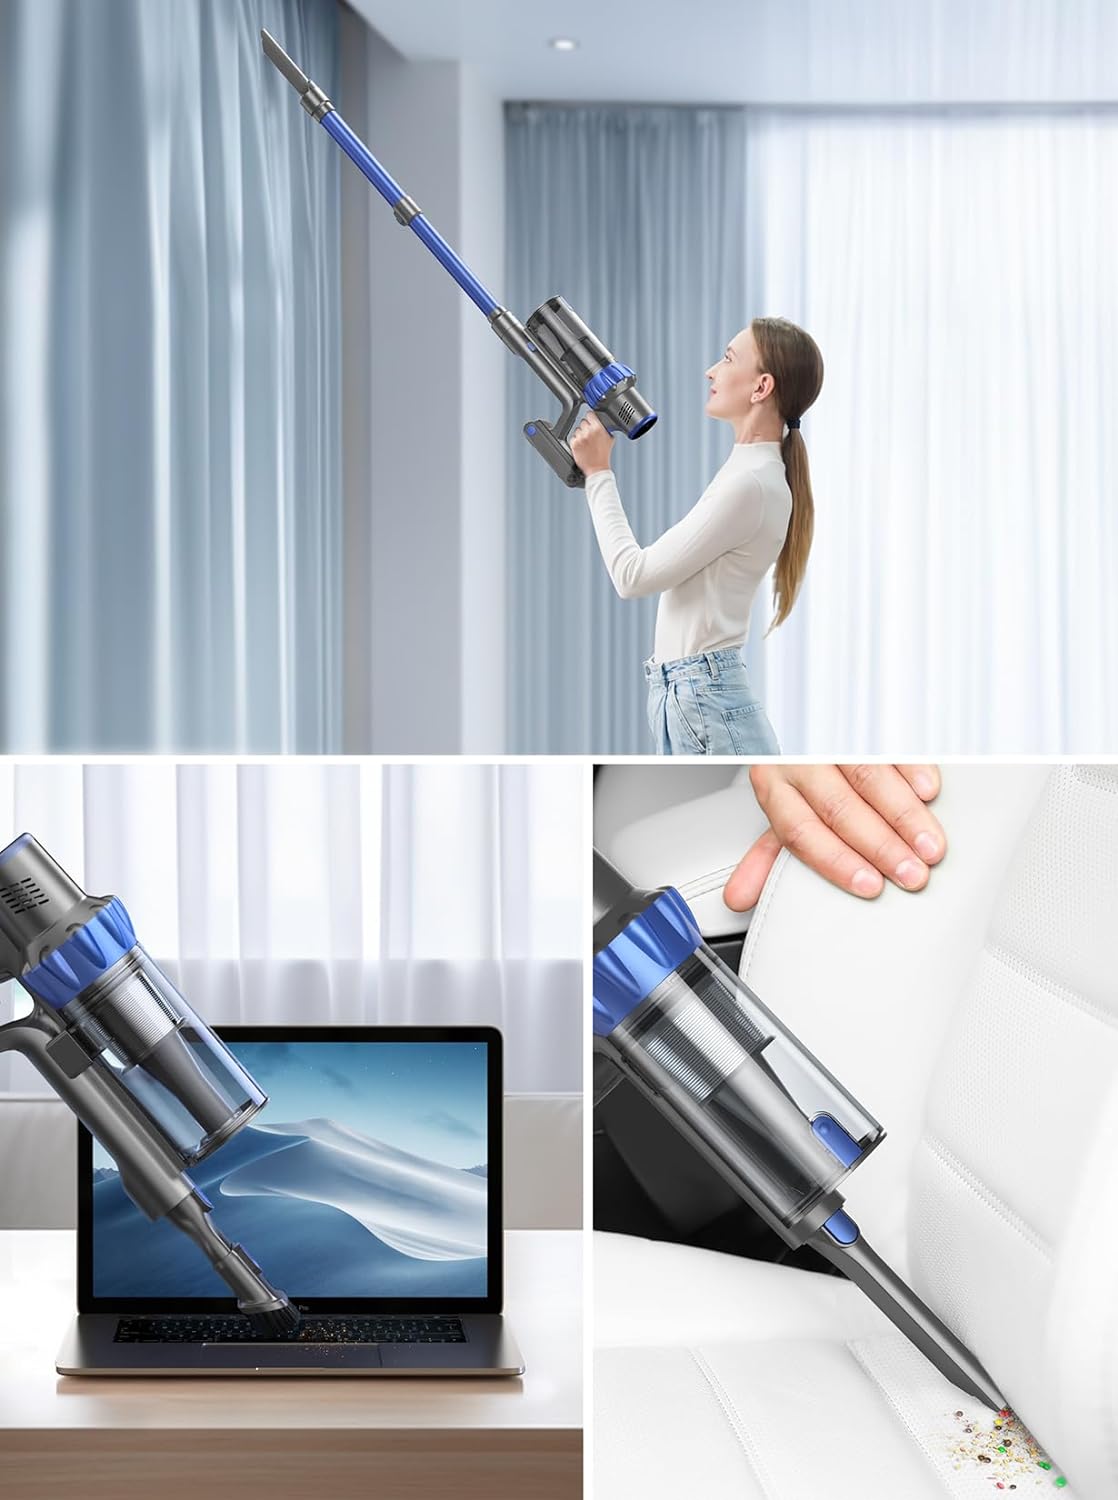 BuTure Cordless Vacuum Cleaner – Buture